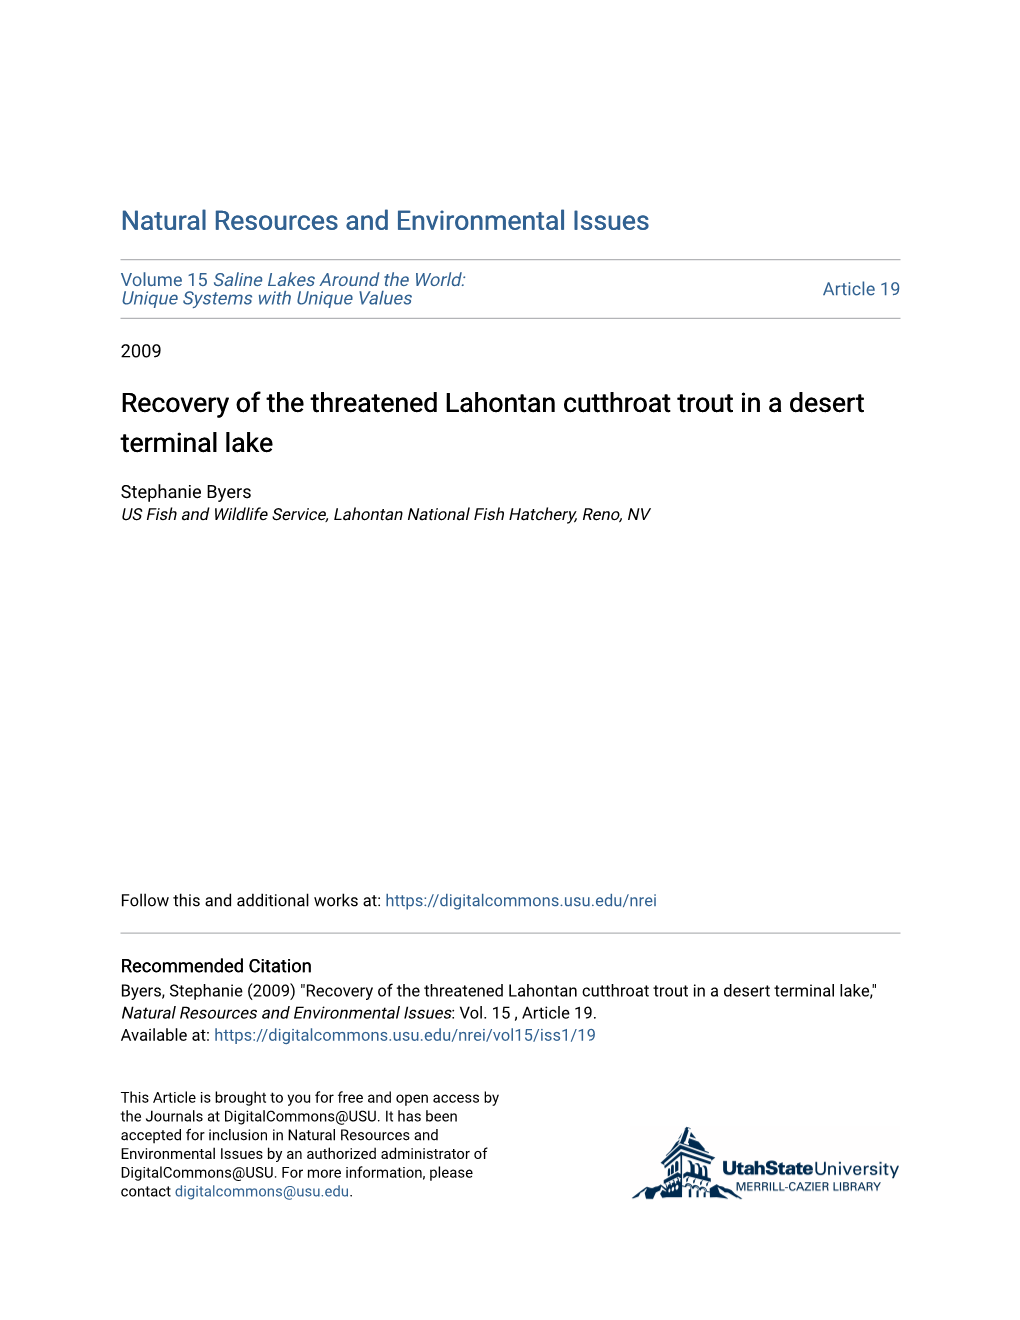 Recovery of the Threatened Lahontan Cutthroat Trout in a Desert Terminal Lake